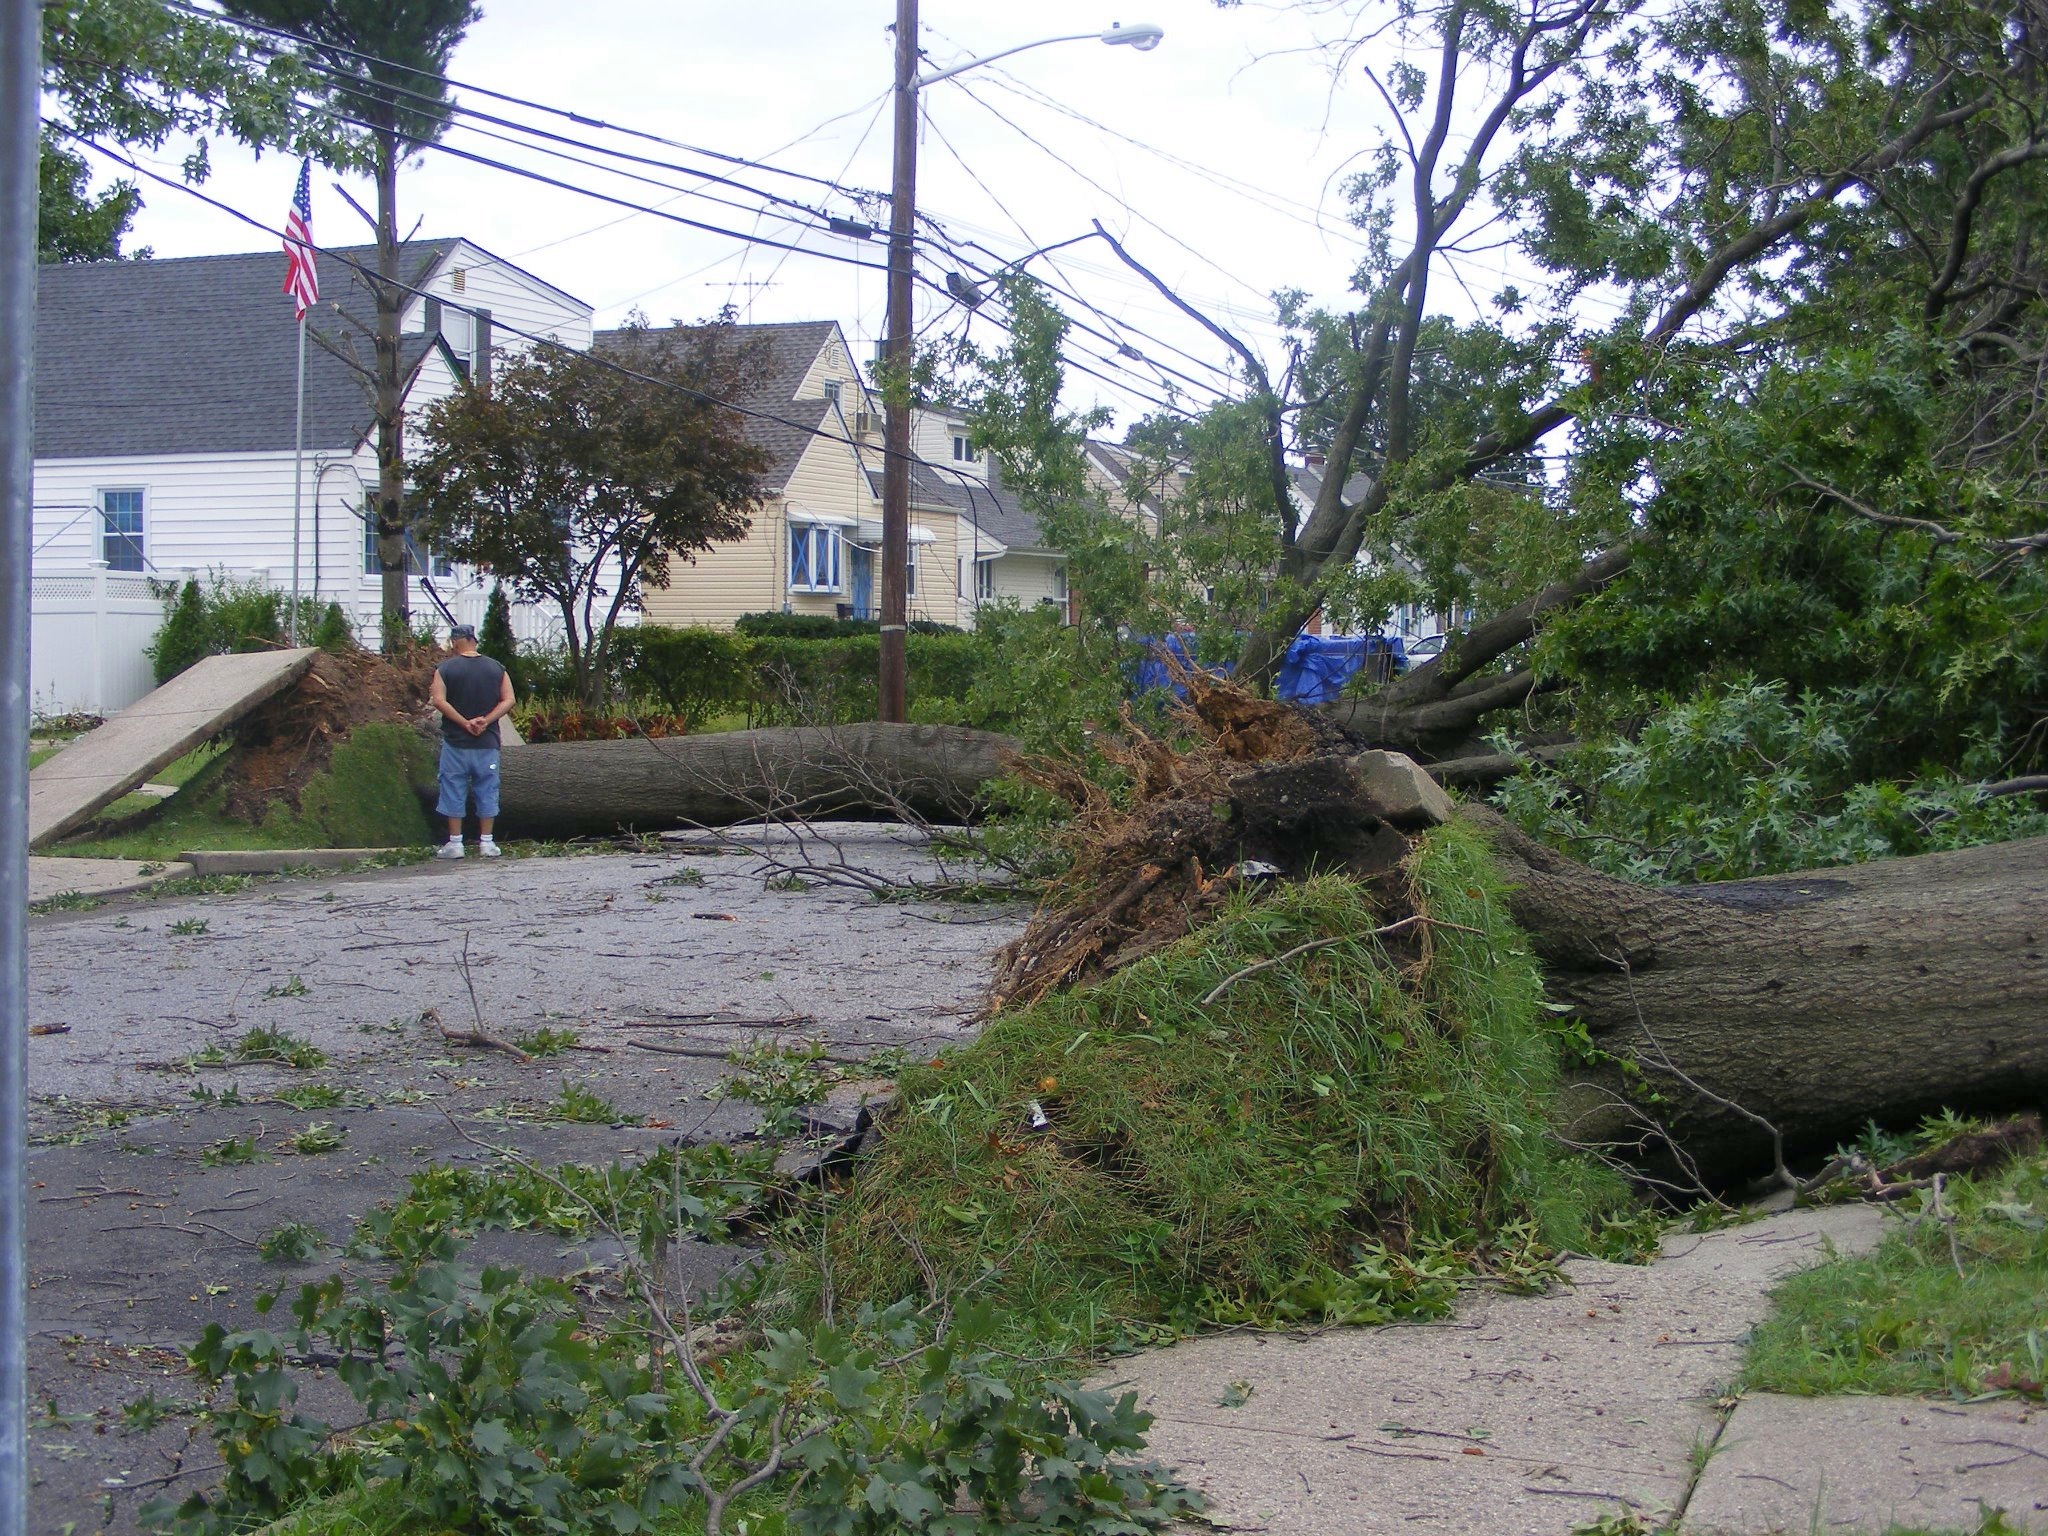 in-elmont-nassau-county-huge-trees-uprooted-credit-facebook-fan-pic-by-kathy-yasenchak-mcmanus.jpg 